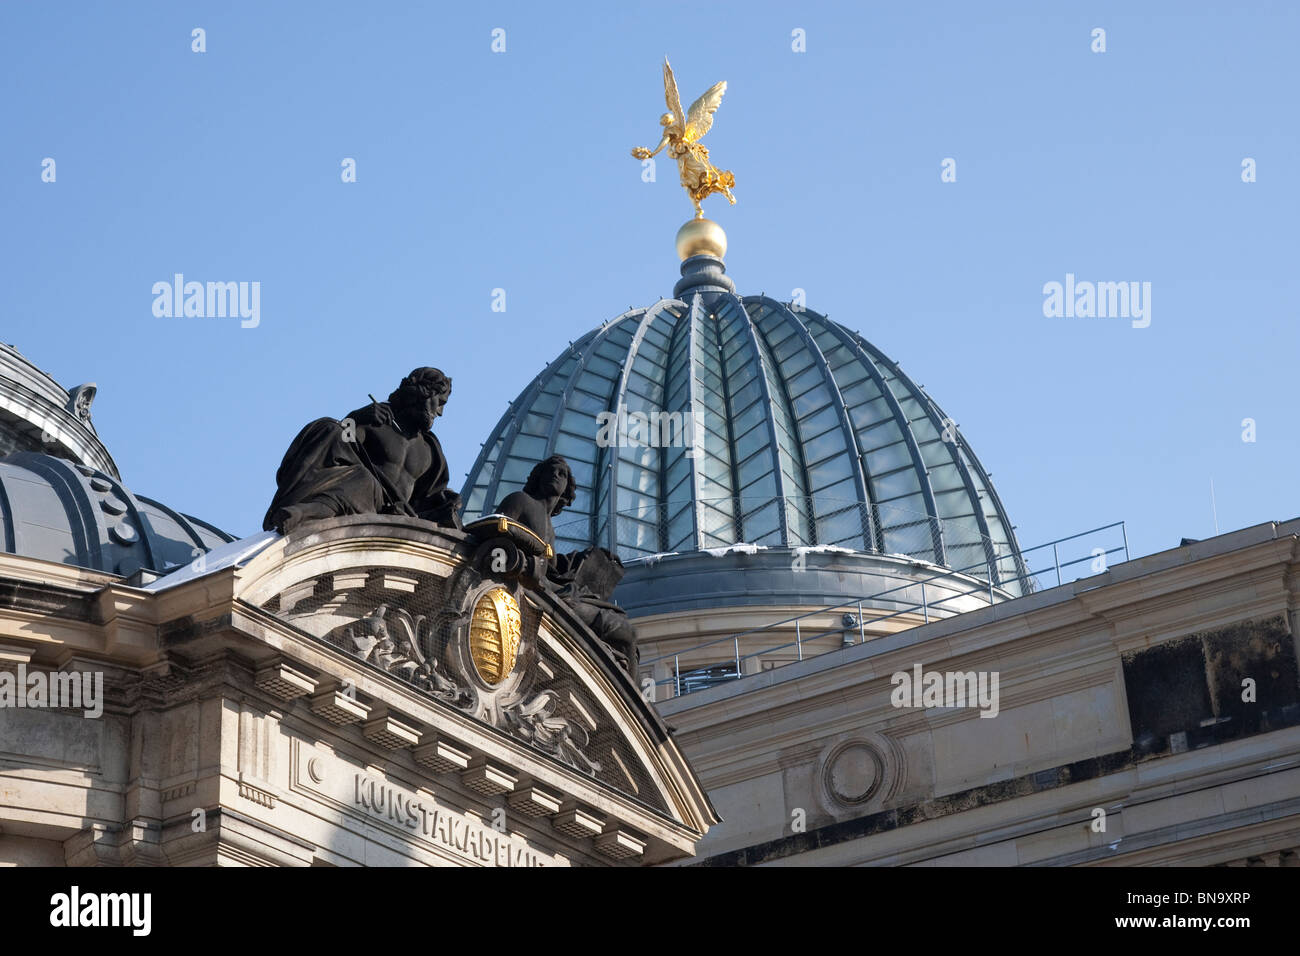 The glass dome of the Kunst Academie, known locally as the Lemon Squeezer, Dresden, Germany. Stock Photo